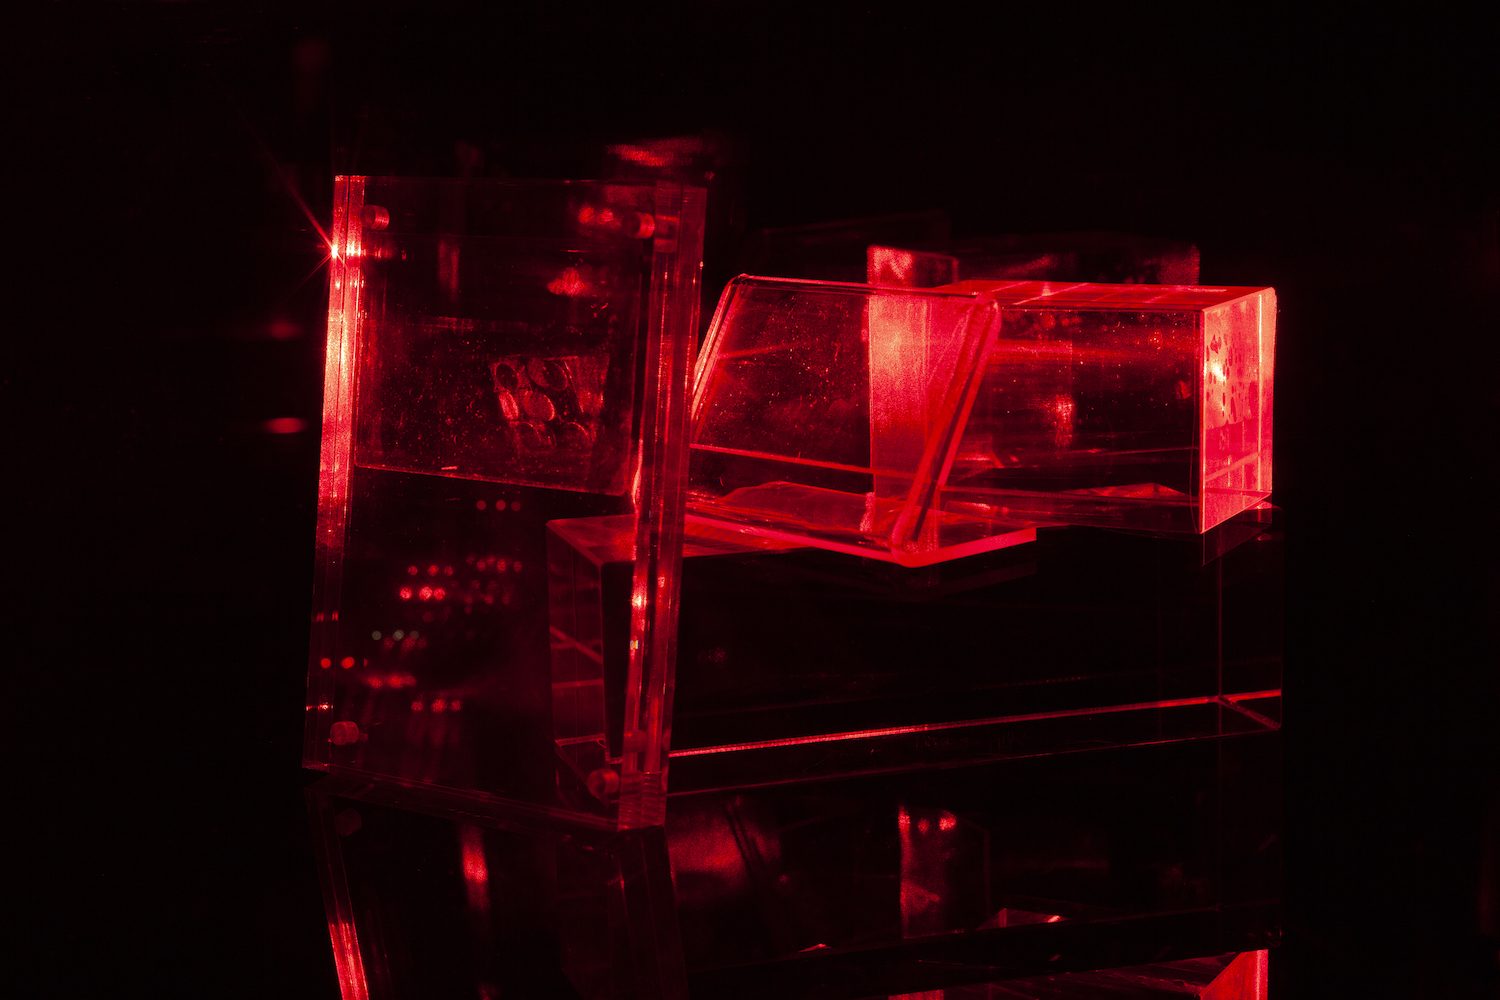 Constantina Zavitsanos, *Boxed Bet*, 2019. Transmission holograms, acrylic mounts, 5mW red laser. Detail view

[image description: Against a darkened black background, an arrangement of glowing red holograms on dimensional clear acrylic mounts. Holographic images of dice mid-roll are lit by a red laser. The light reflects against the black plexiglass surface on which the holograms sit.]